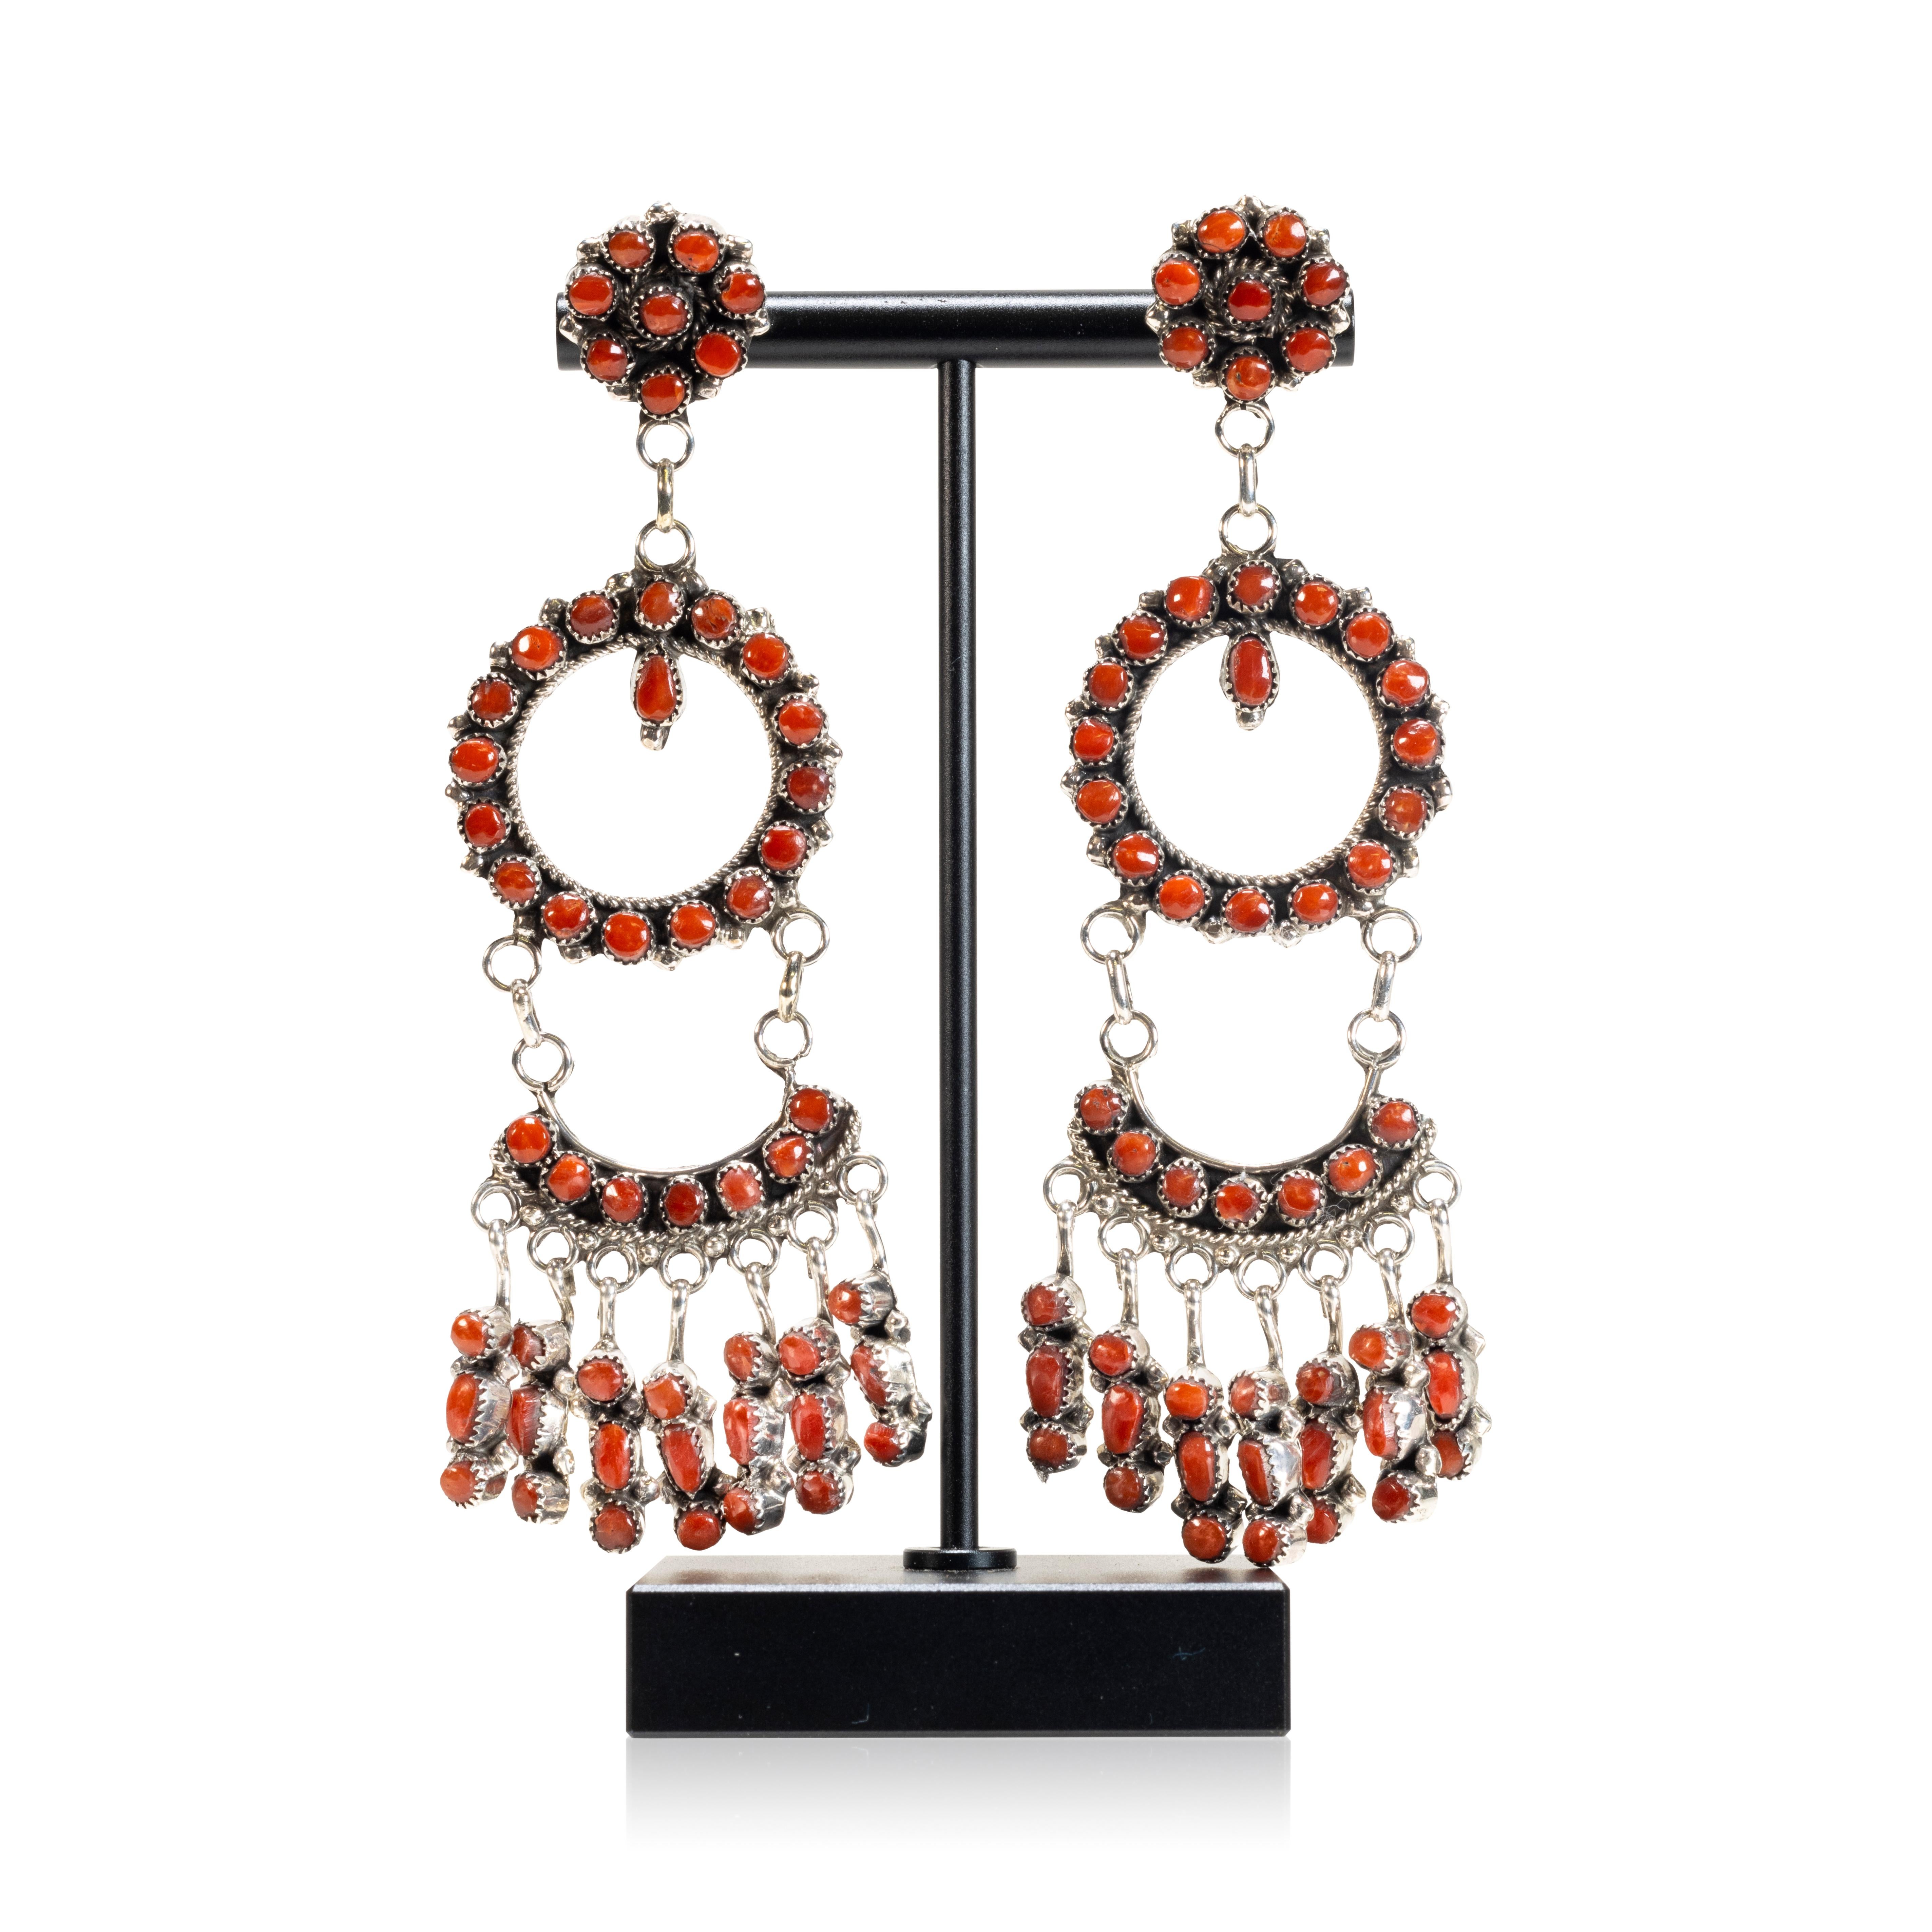 Zuni made natural oxblood coral and sterling silver chandelier earrings by artist Phyllis Laate. Each earring has 53 small coral cabochons hanging in layers that move gracefully. Hallmarked on the back. Lightweight with sterling post backs.

PERIOD: